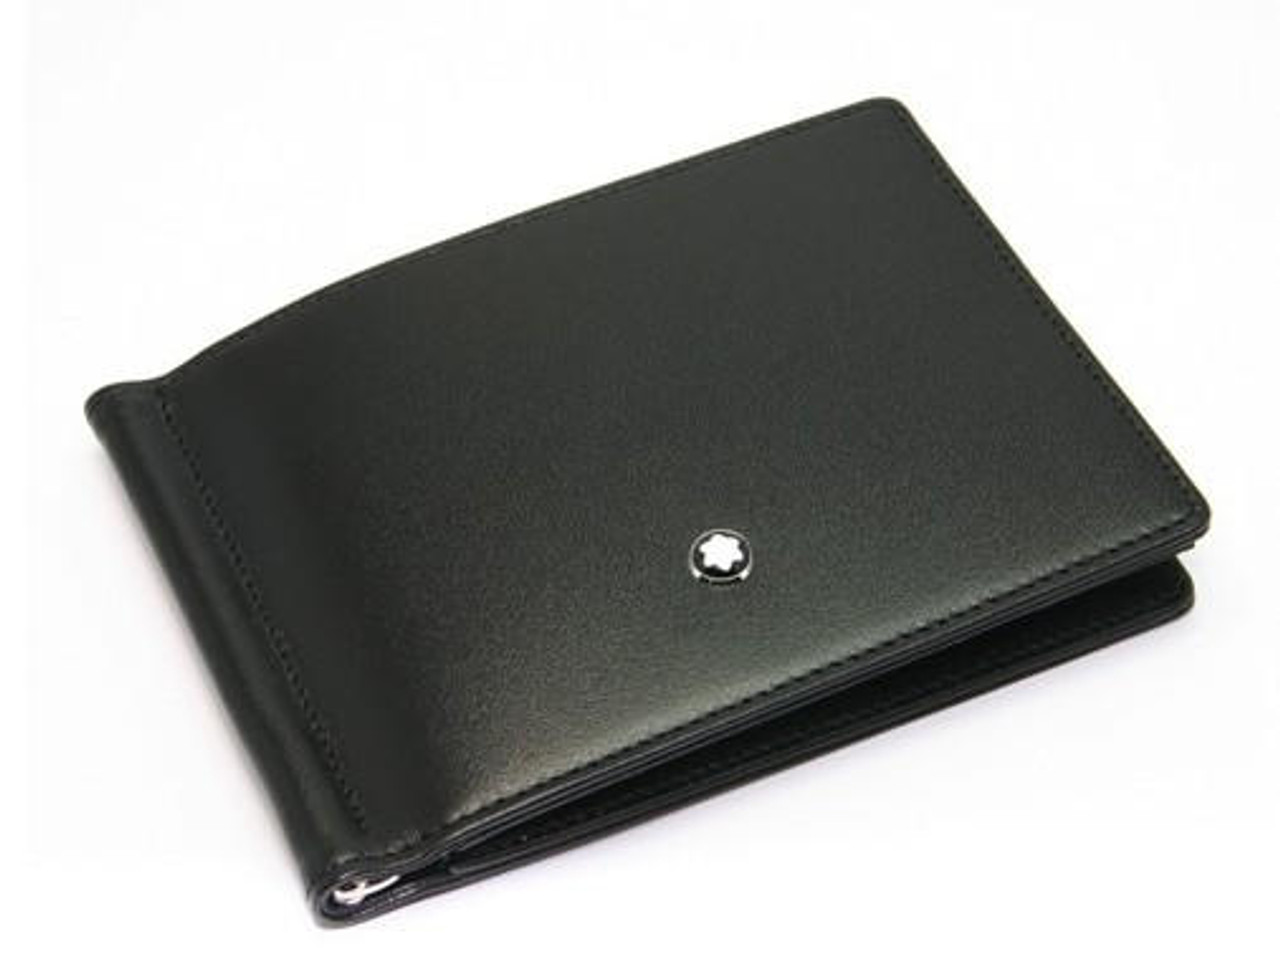 Montblanc Extreme 2.0 Wallet 6cc with Money Clip - Luxury Credit